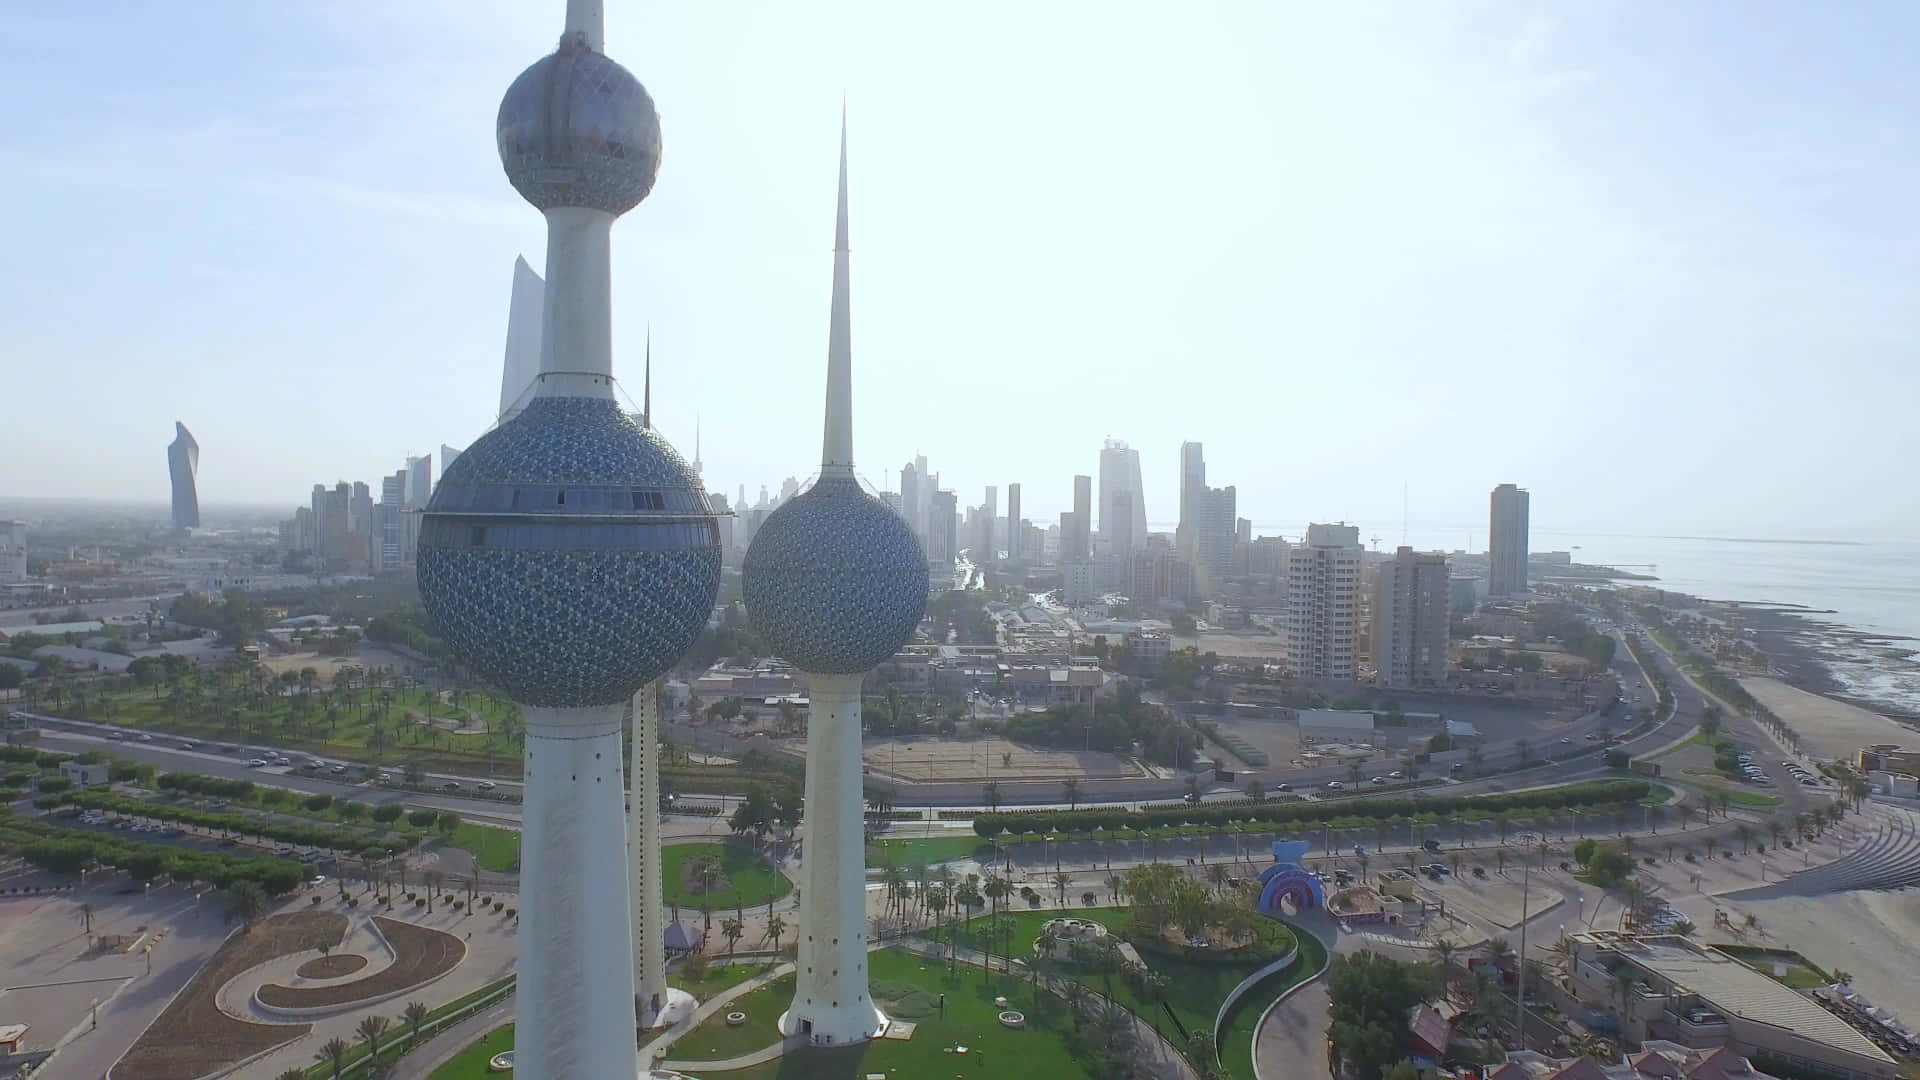 The Iconic Kuwait Towers Against the Backdrop of the Bustling City. Wallpaper